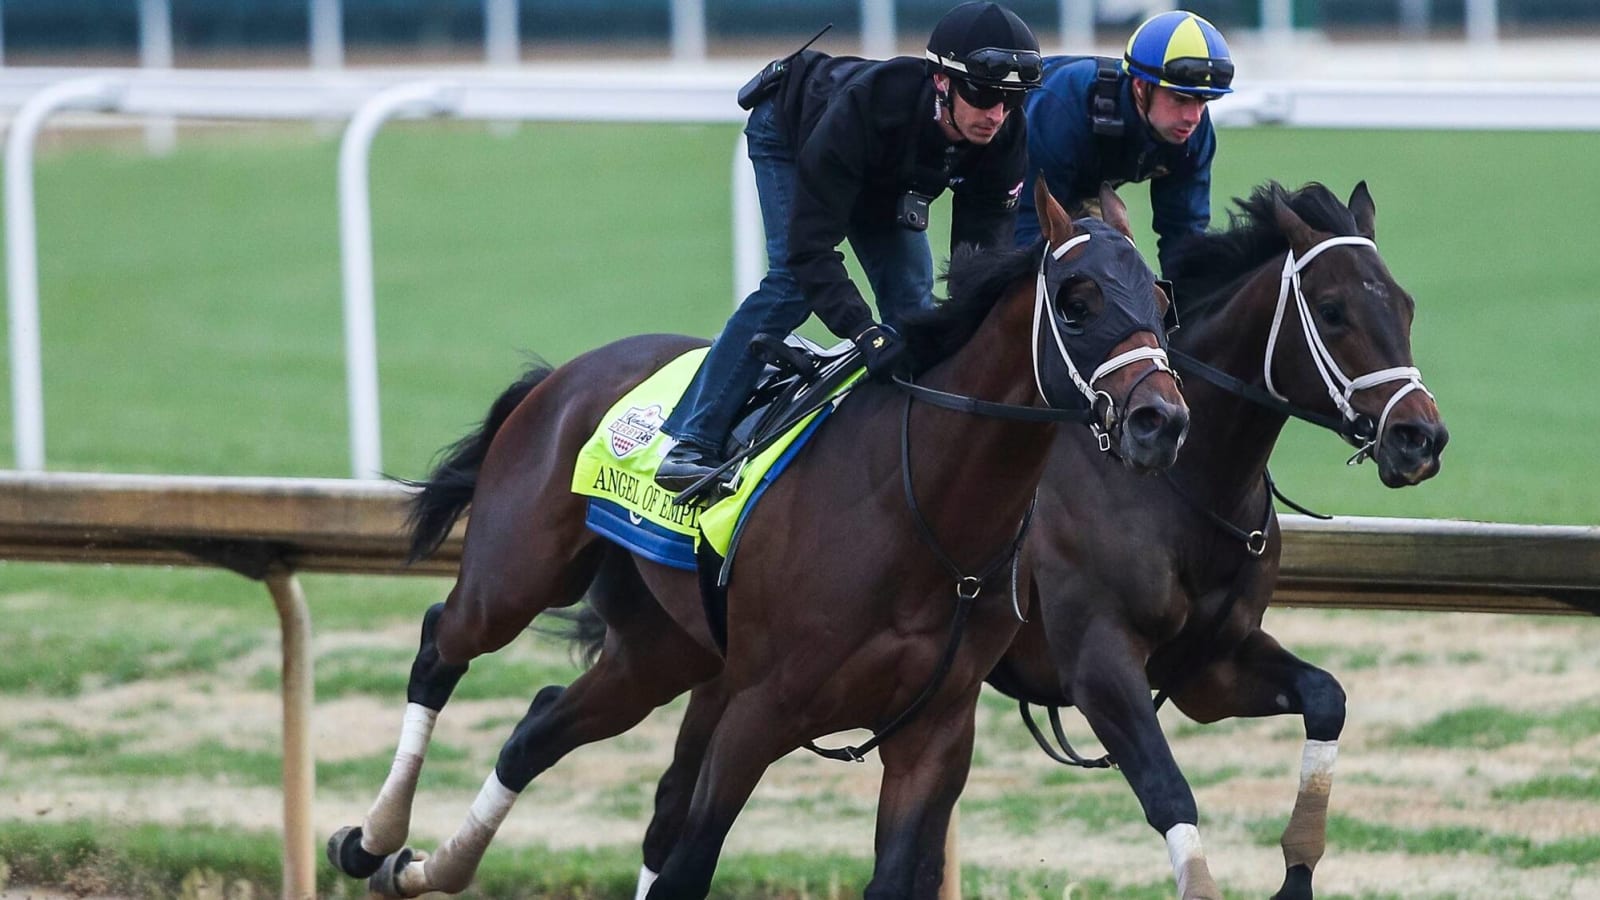 Kentucky Derby best bets: A look at the rest of the field, now that Forte is out